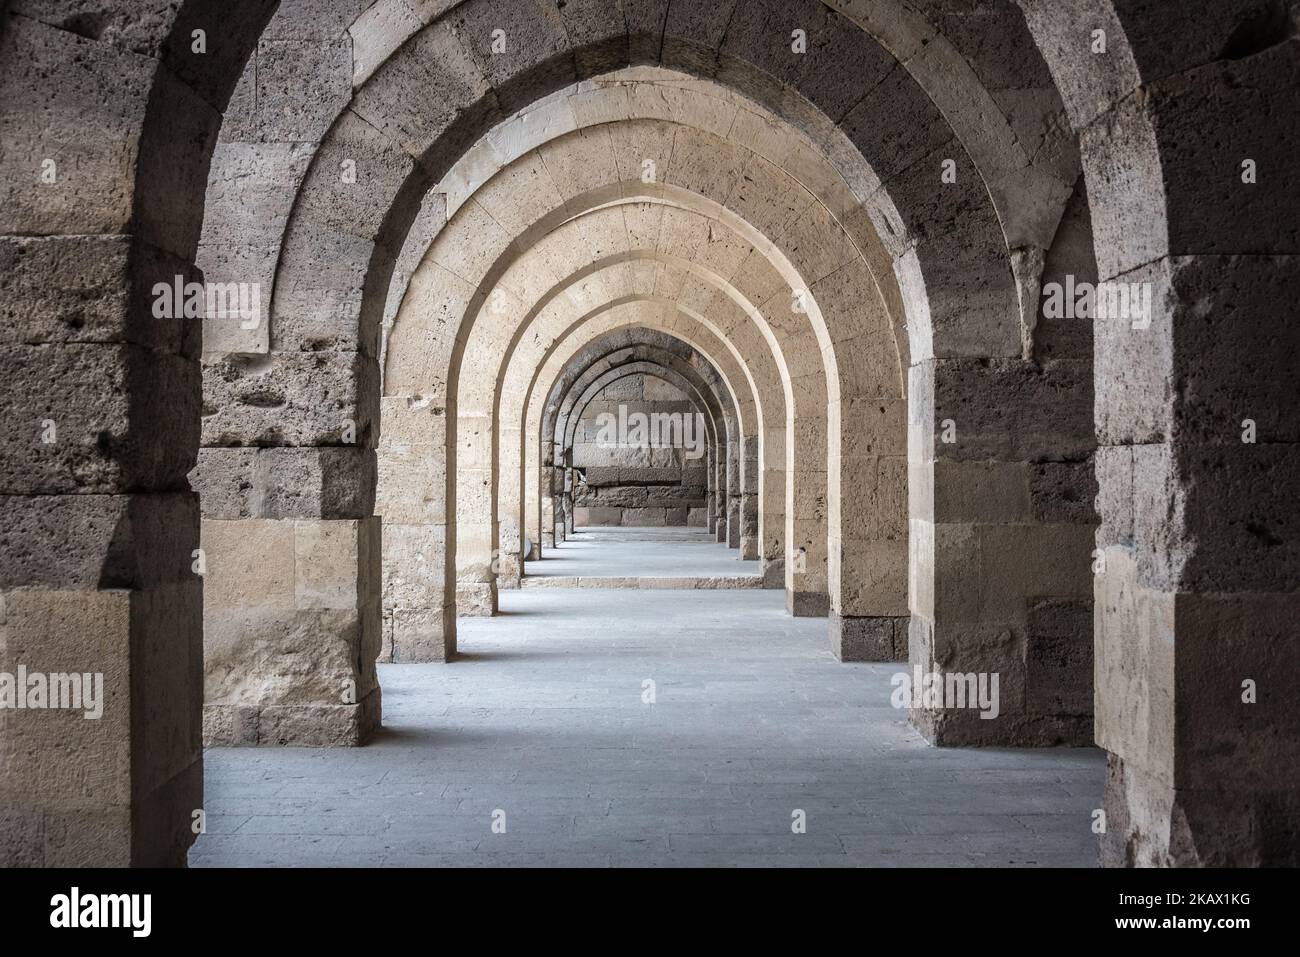 Arches in a hallway corridor in the Sultanhan? Caravanserai, a historic pit  stop for merchants and caravans traveling along the Silk Road in Anatolia,  Turkey. Photo taken 3 March 2018. (Photo by